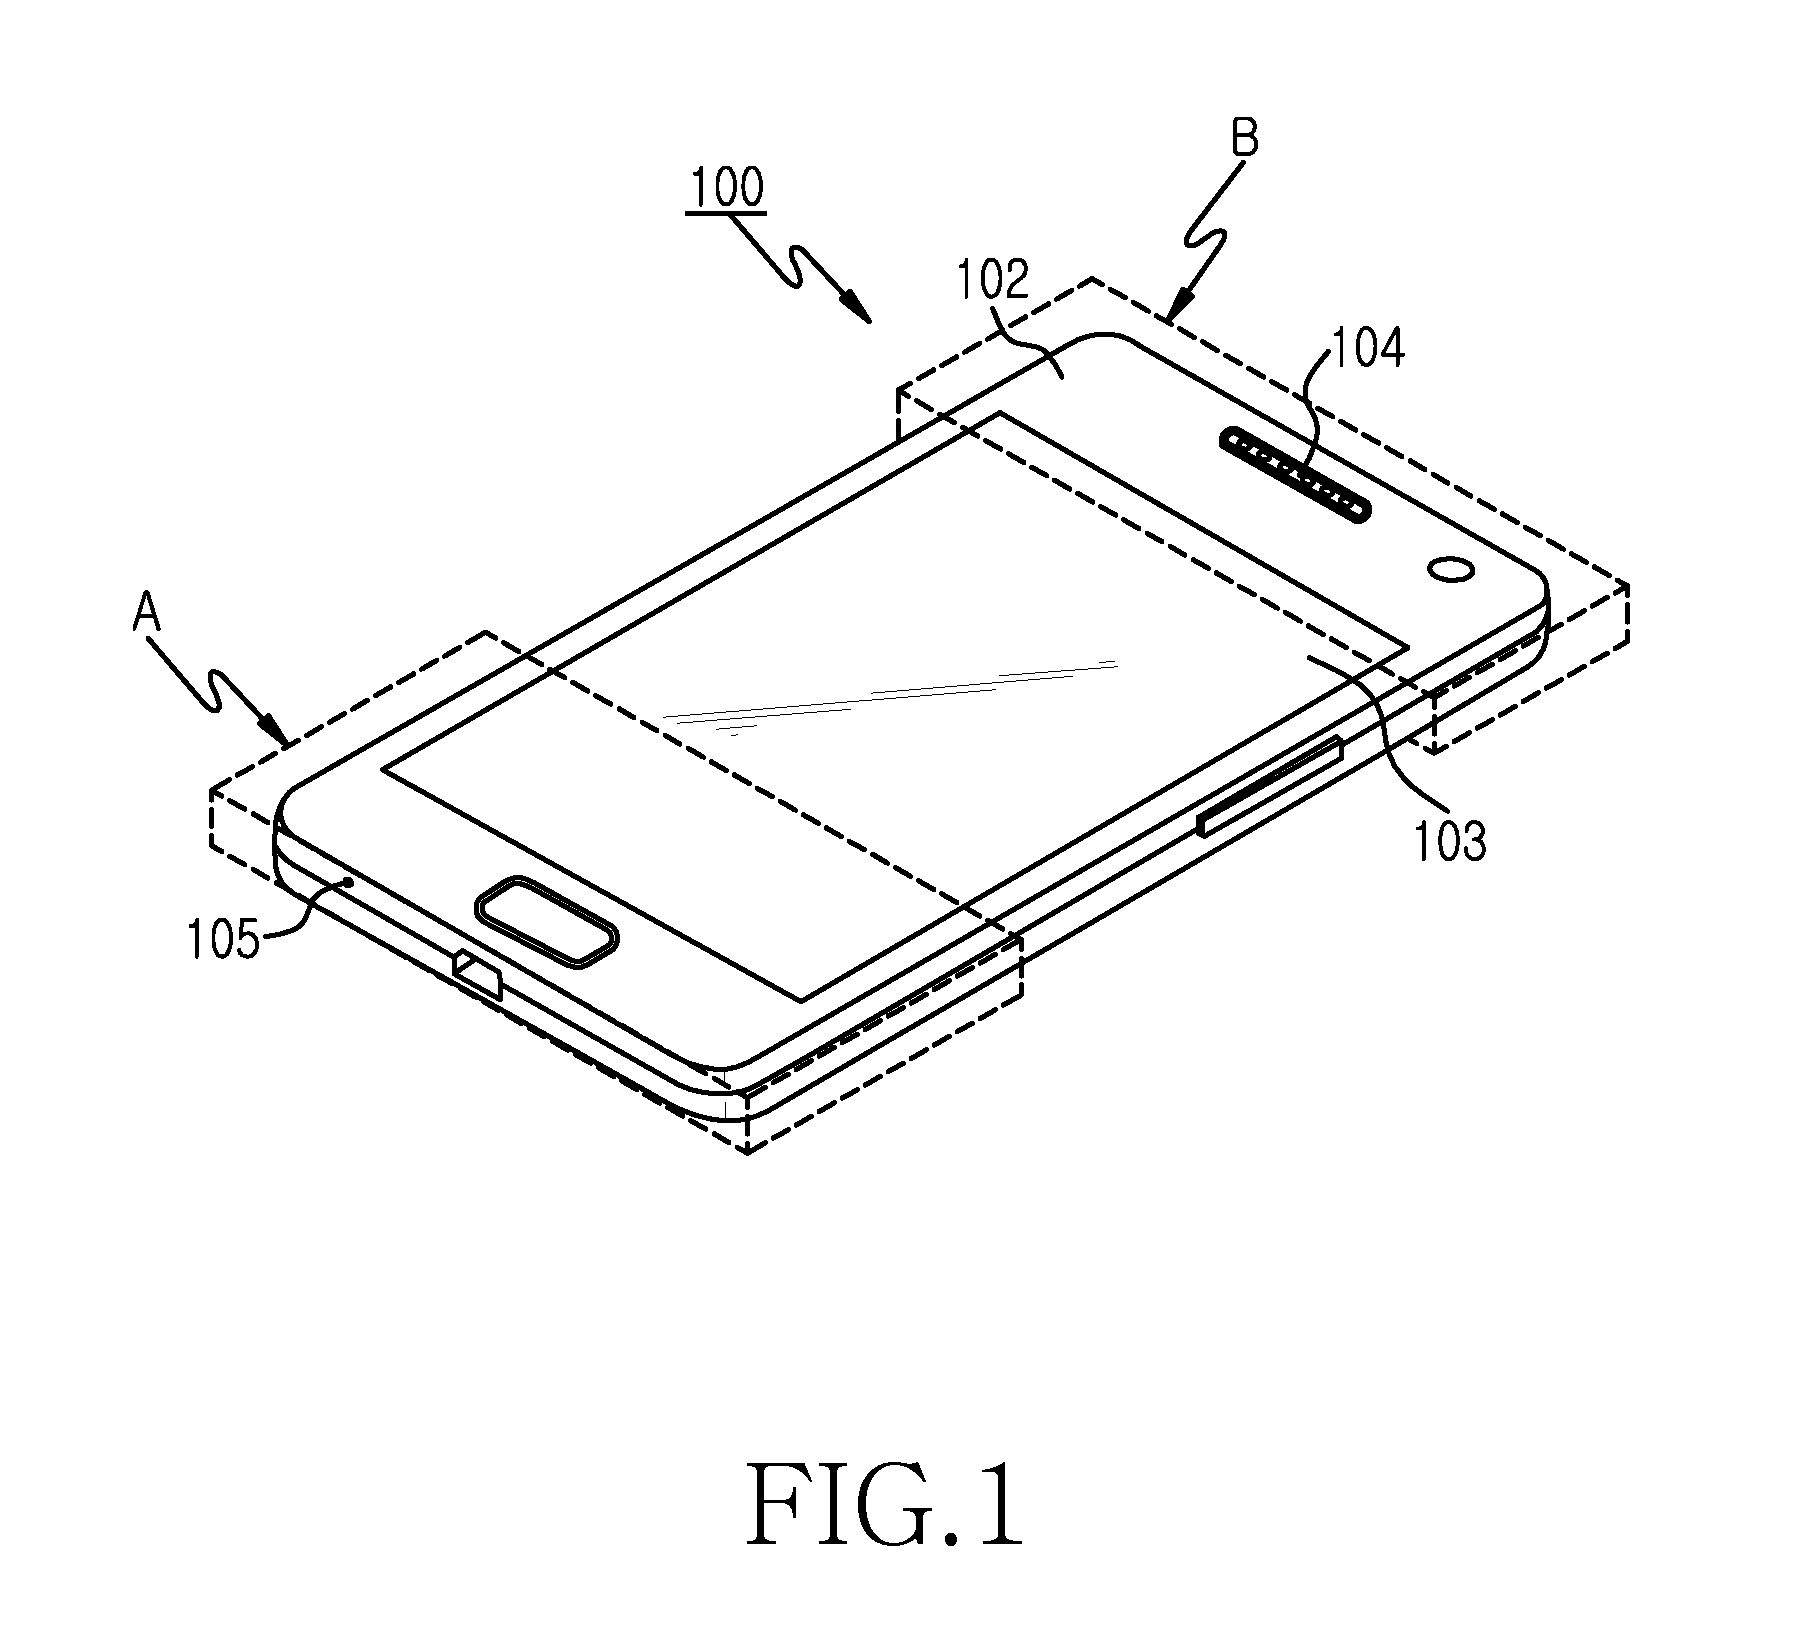 Built-in antenna for electronic device